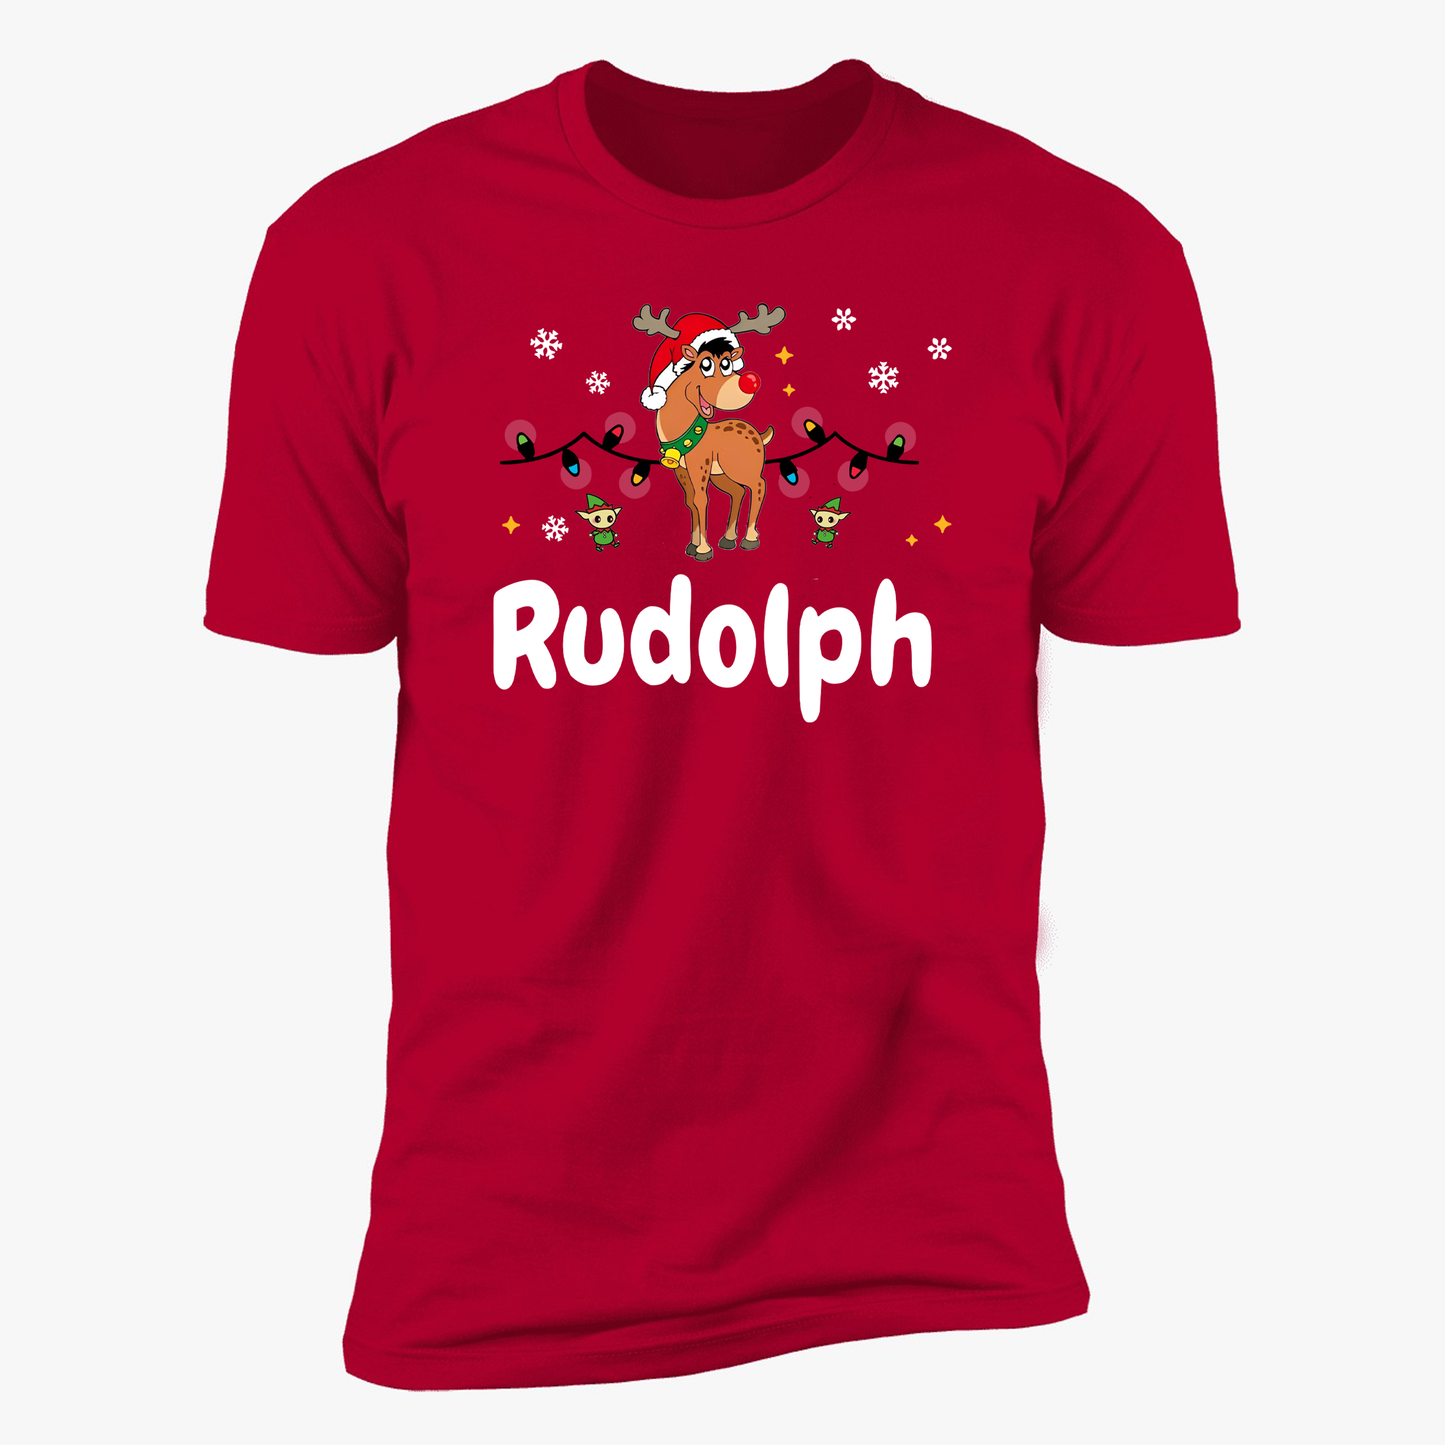 *Most Likely To try To Ride Rudolph & Rudolph Red Deluxe Unisex Tees*